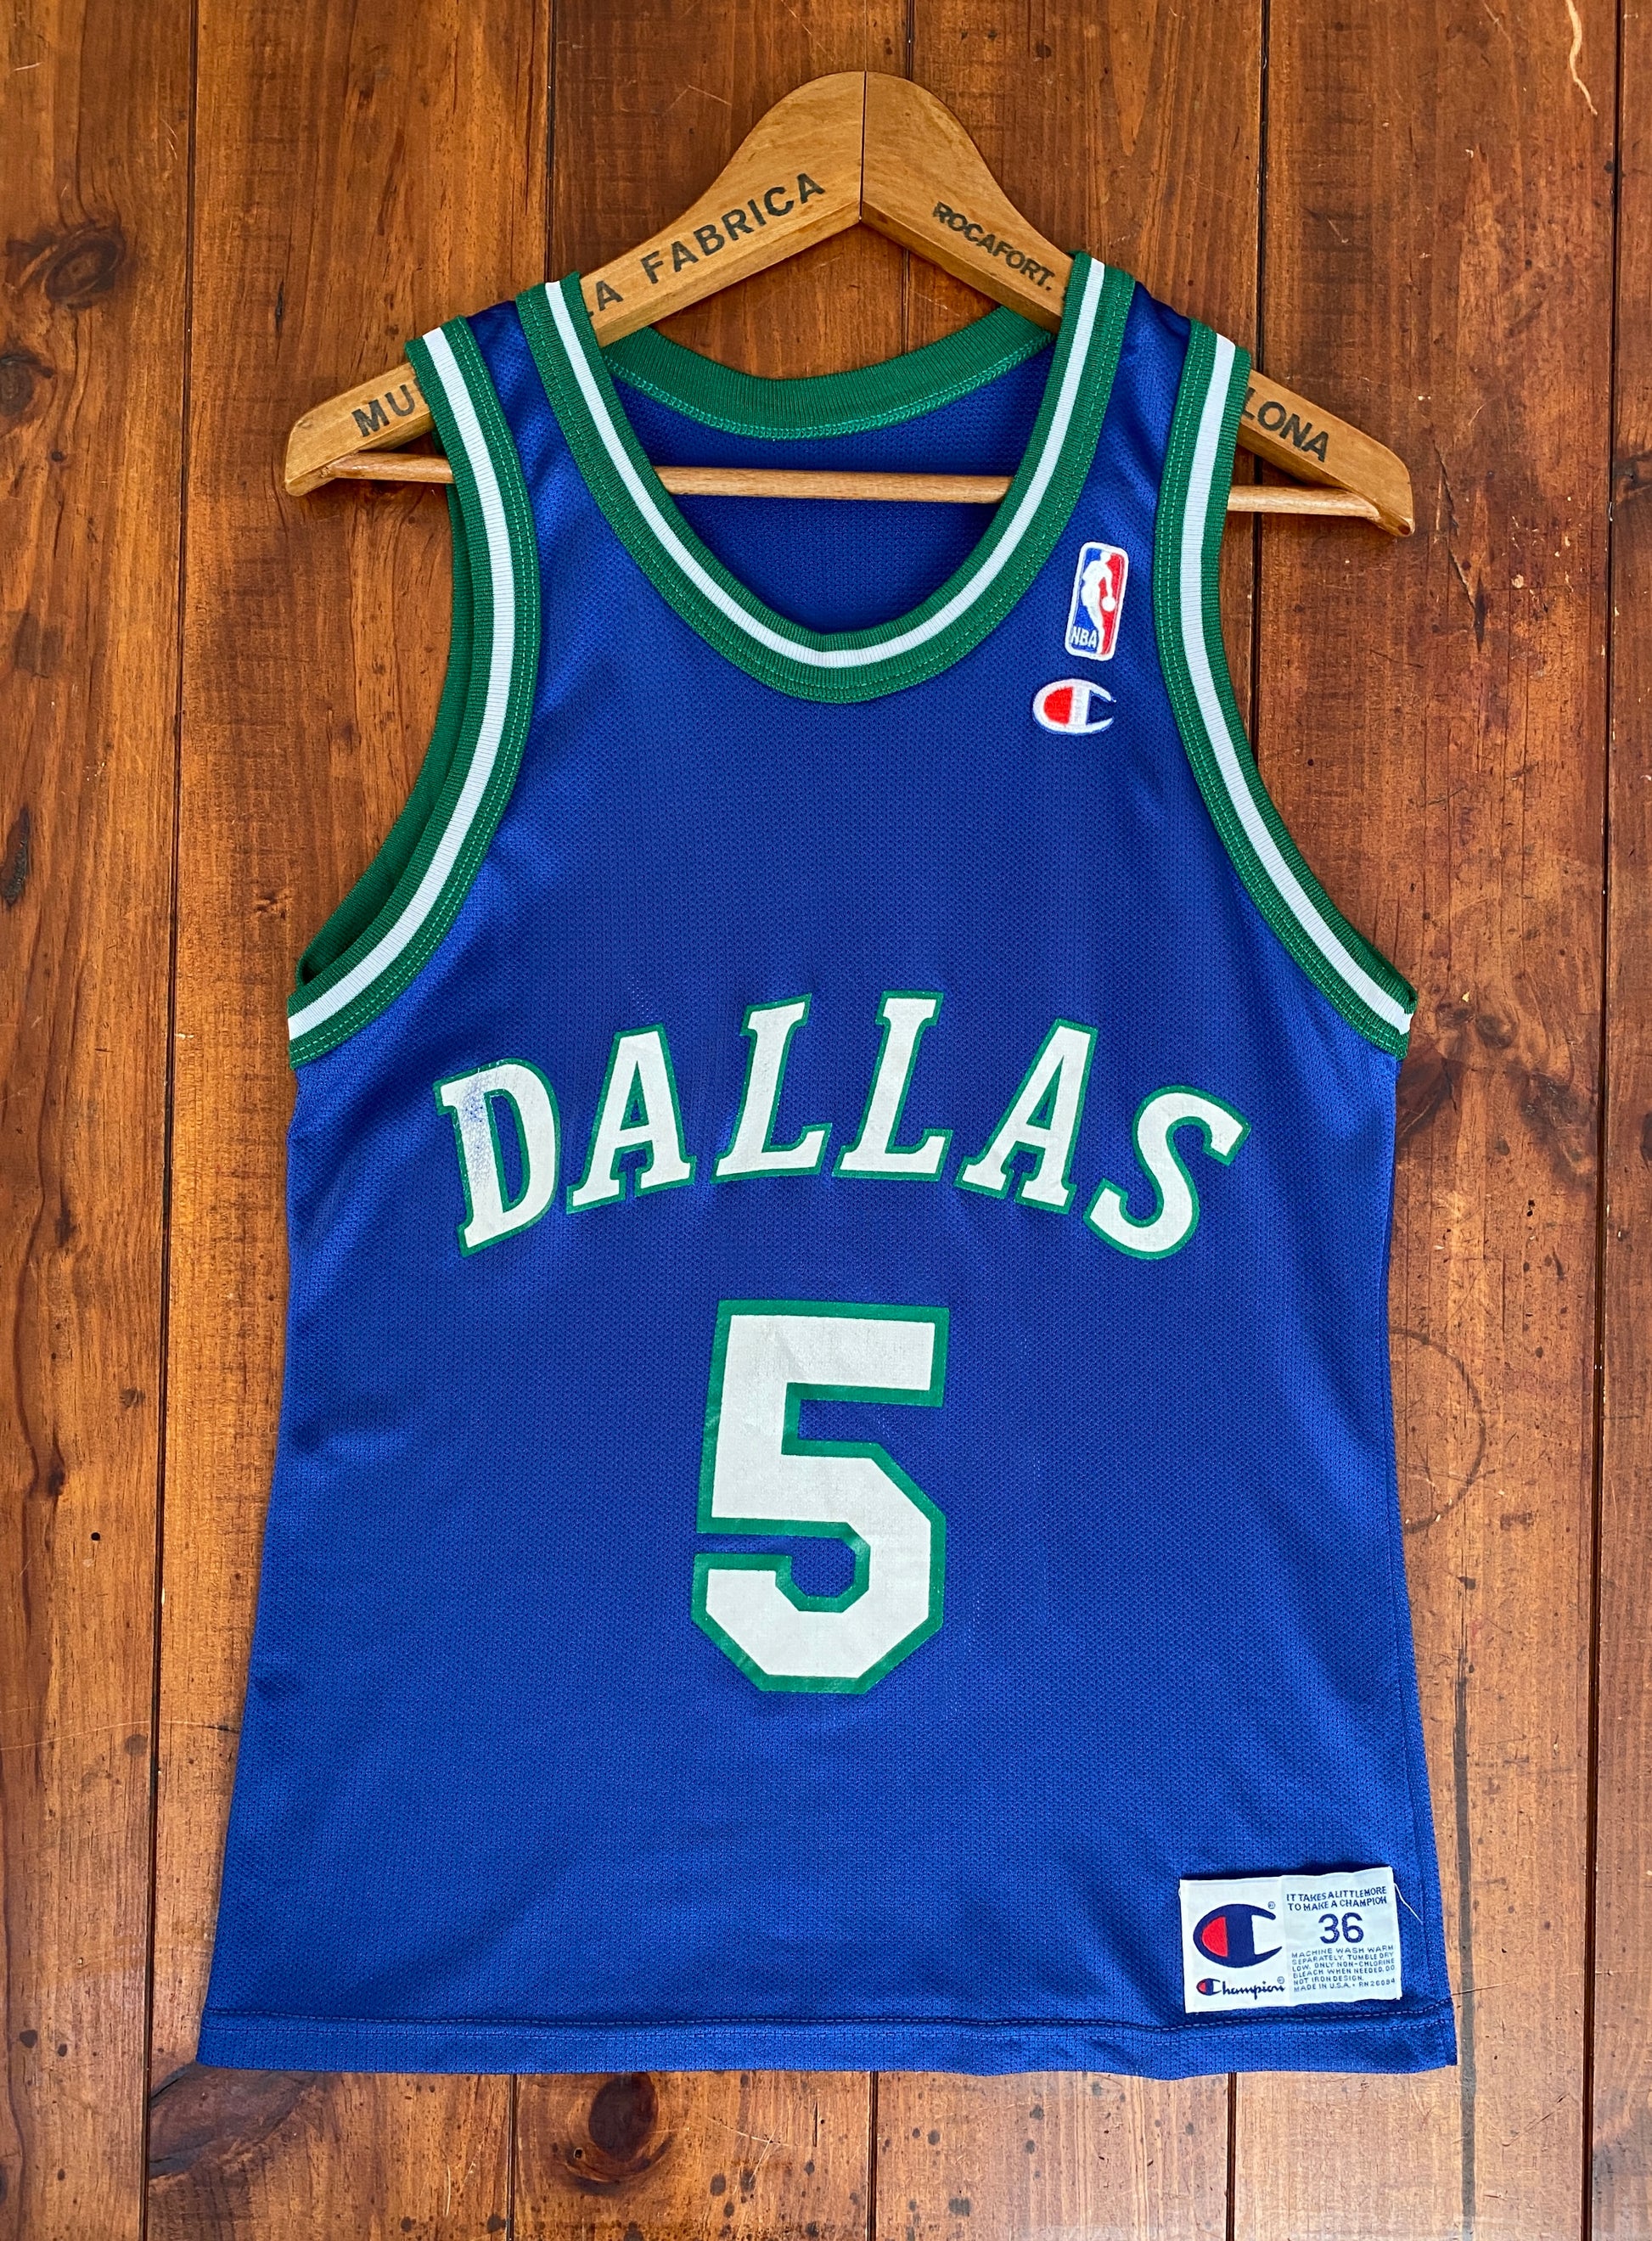 VTG 90s NBA Dallas #5 Kidd Jersey - Size 36, Made in USA by Champion